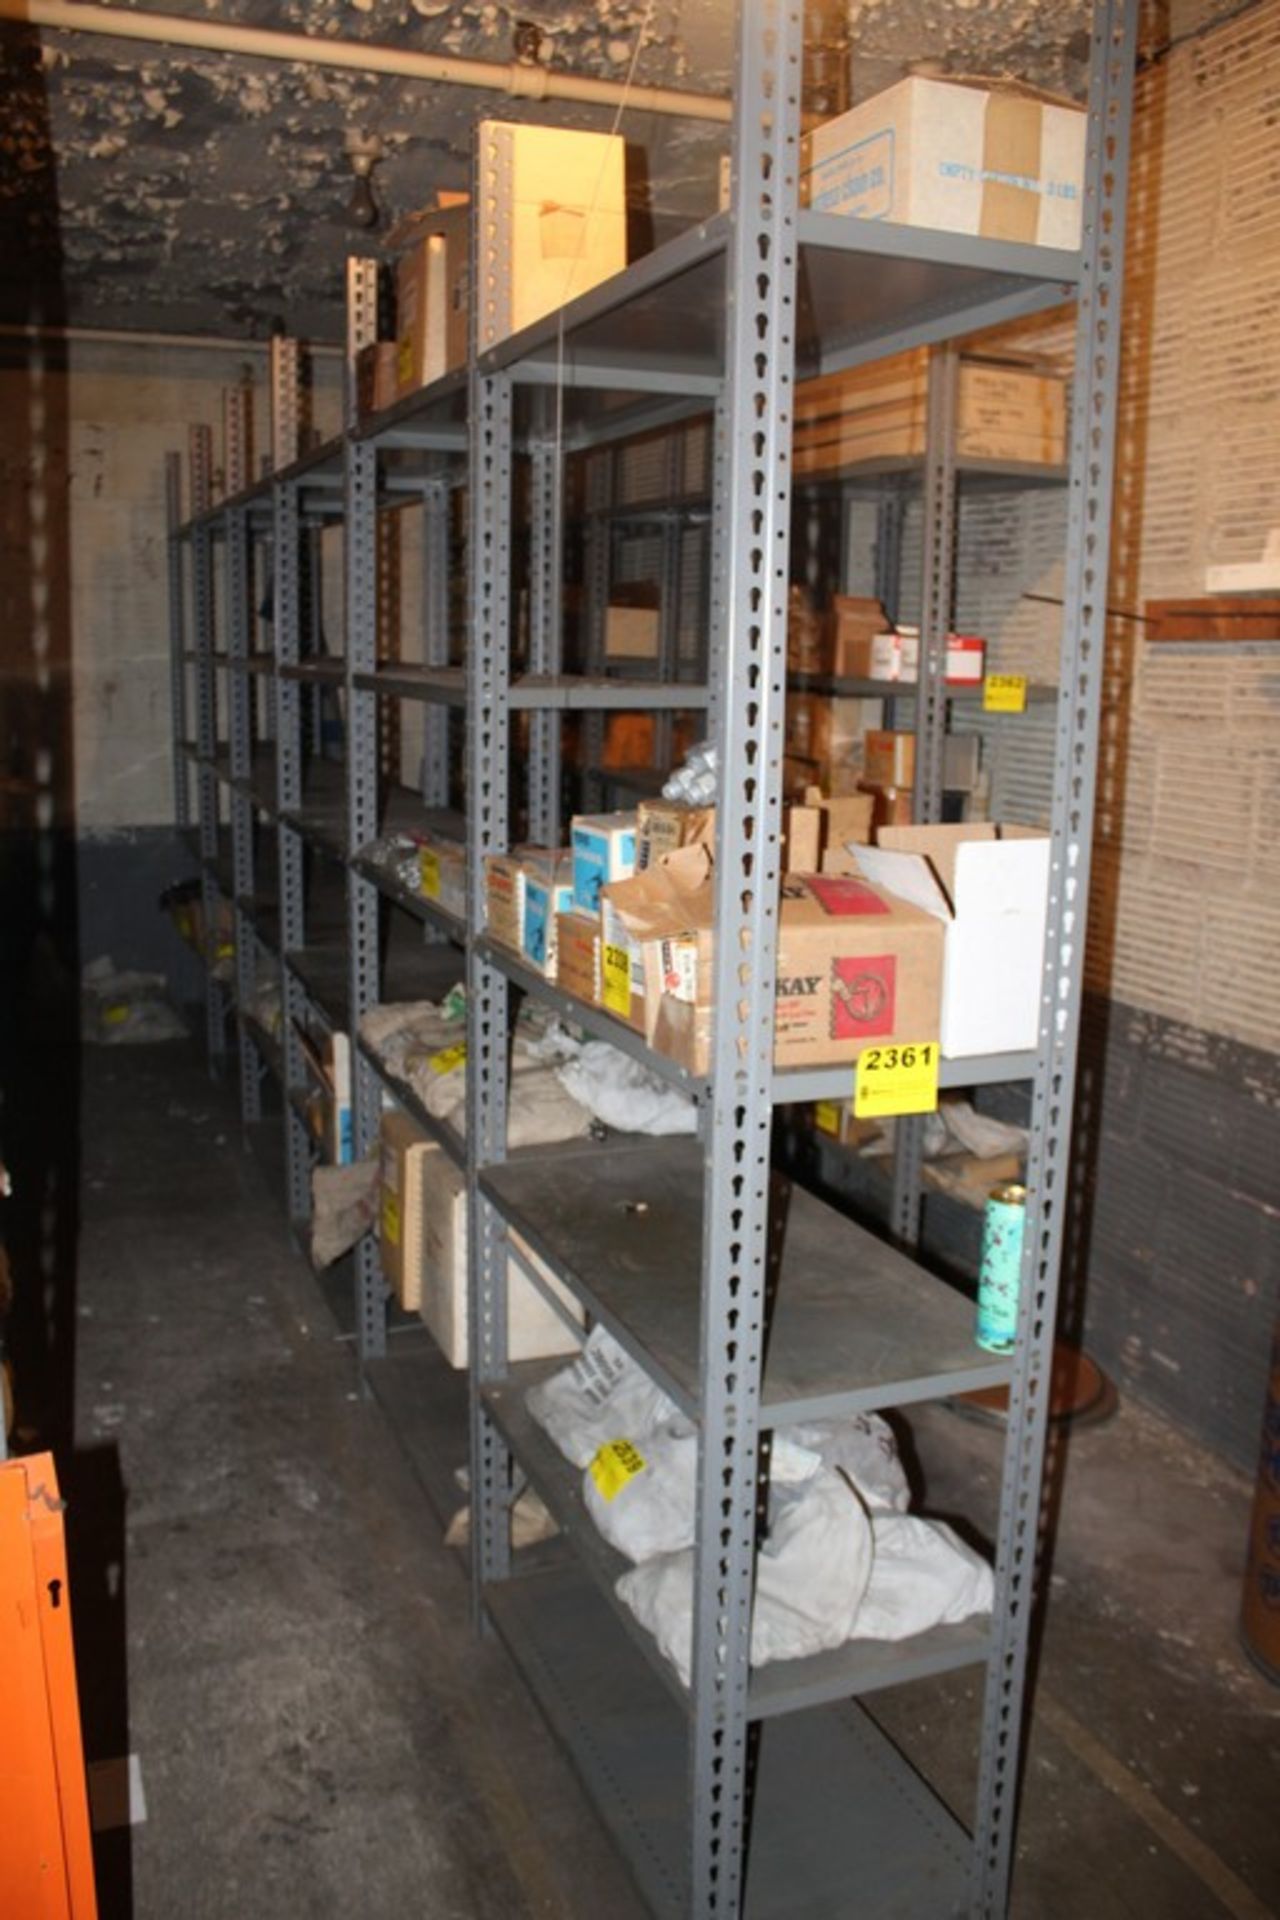 SECTIONS OF ADJUSTABLE METAL SHELVING 36"X18"X84"